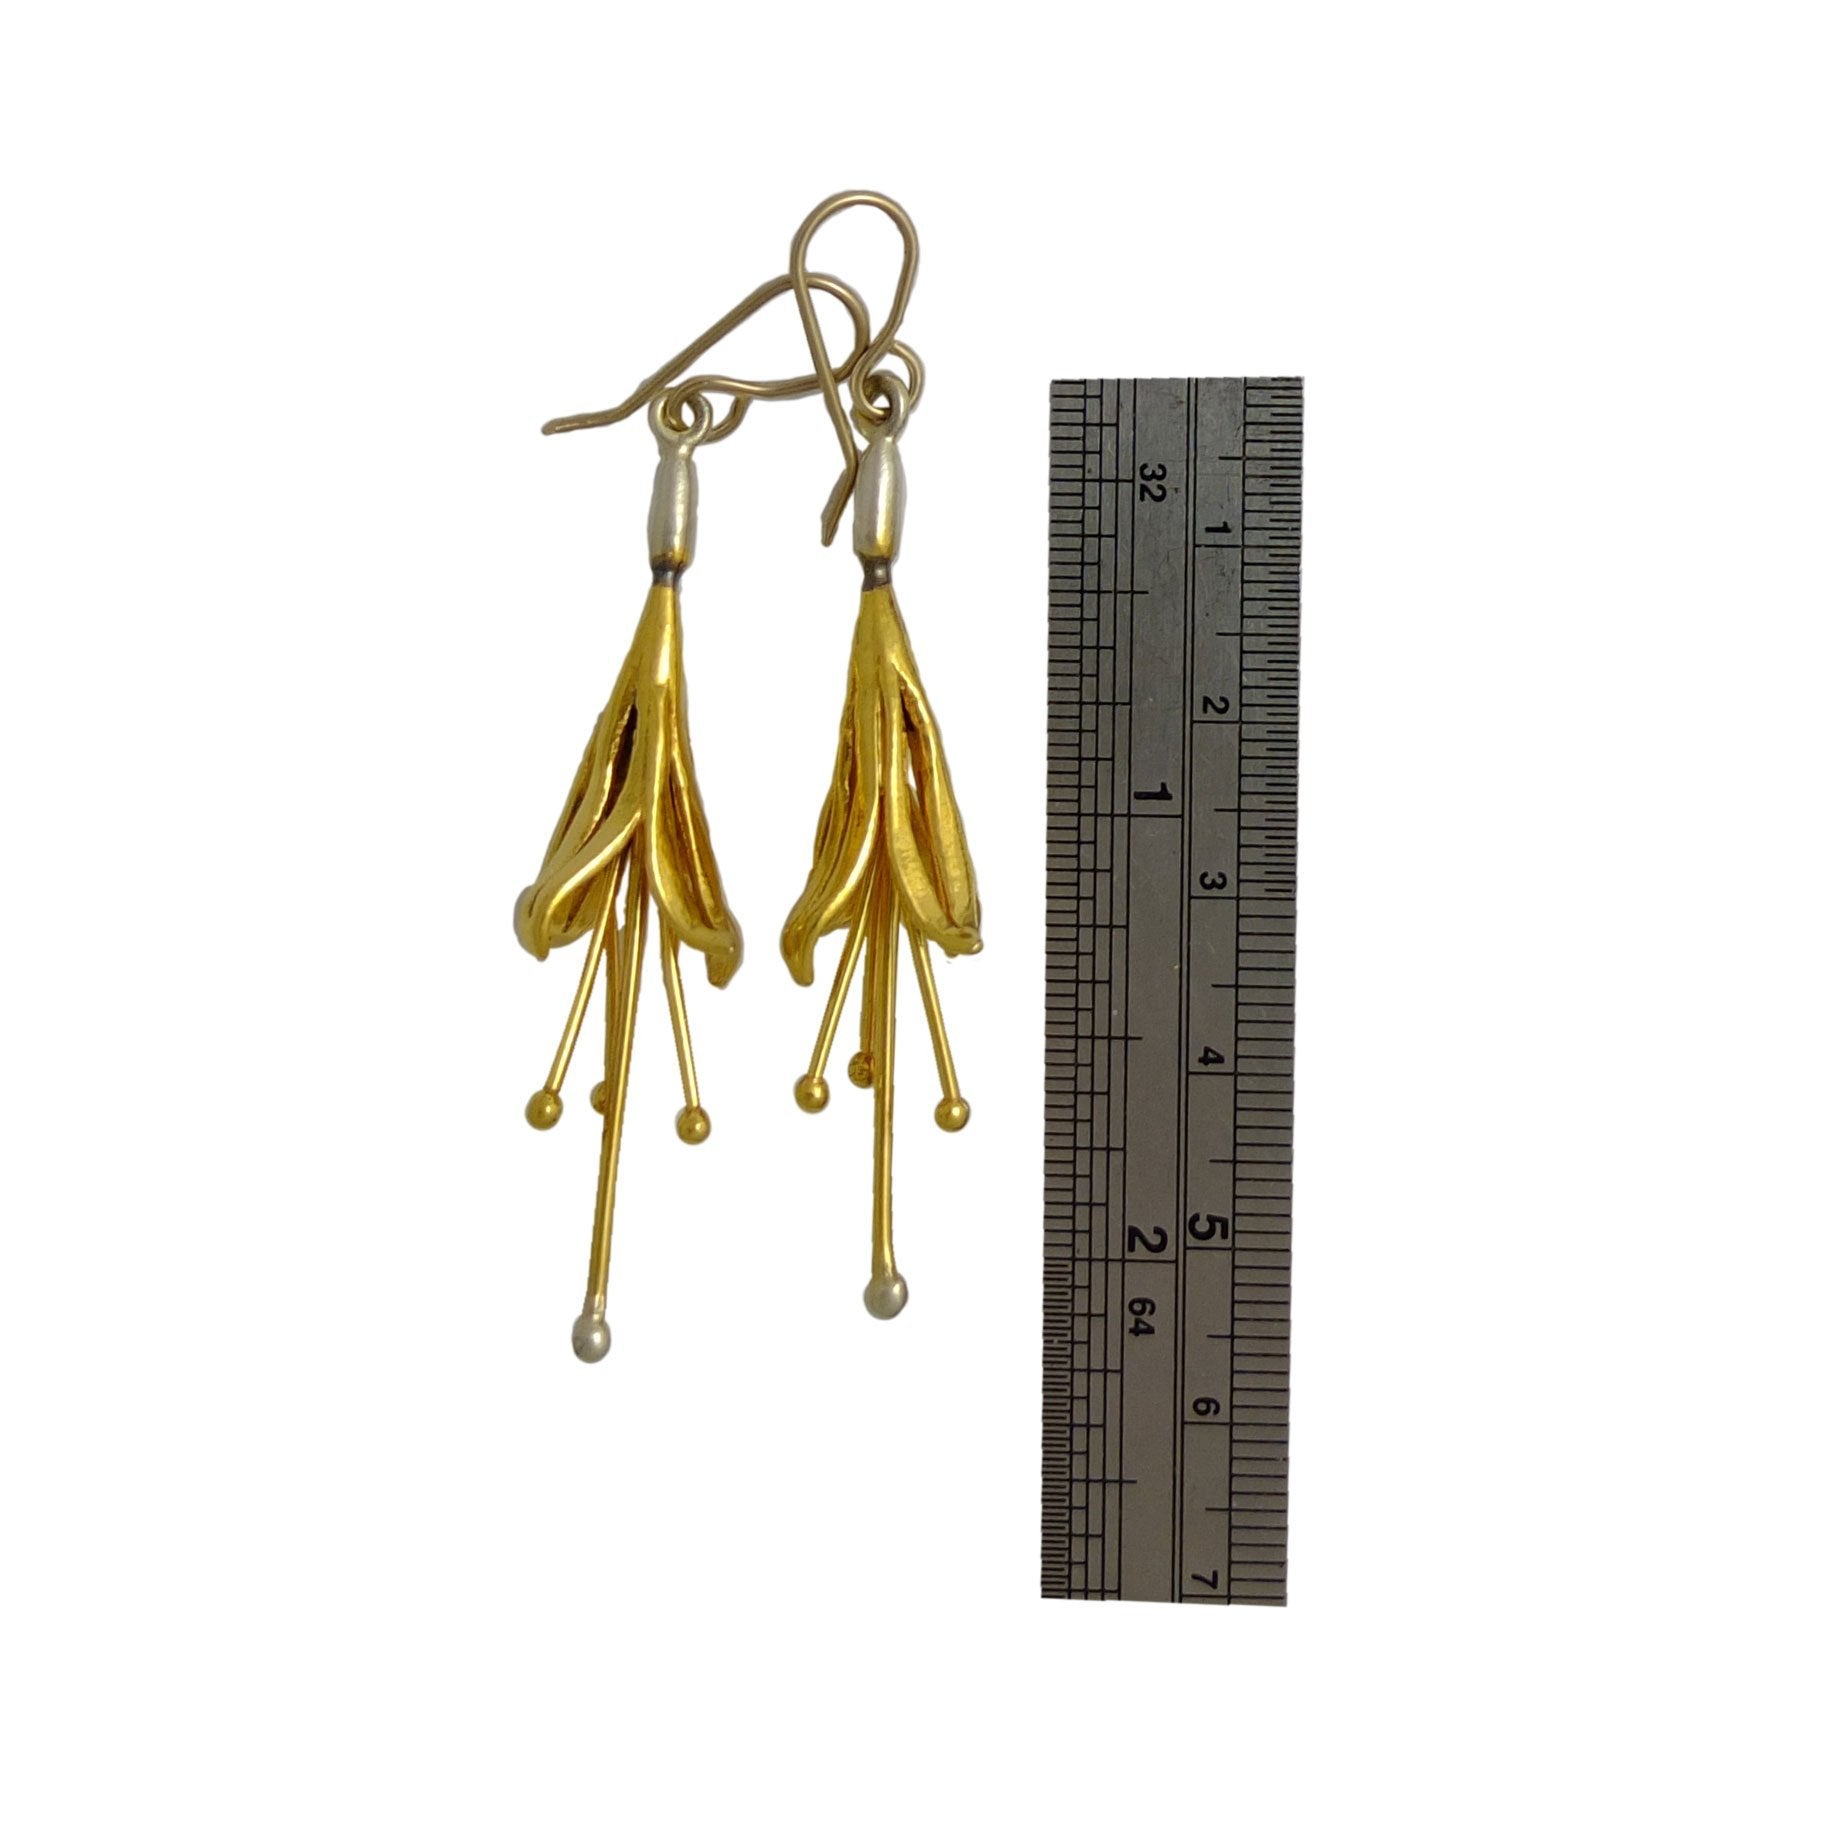 ruler size Kōtukutuku earrings, silver with a gold vermiel surface